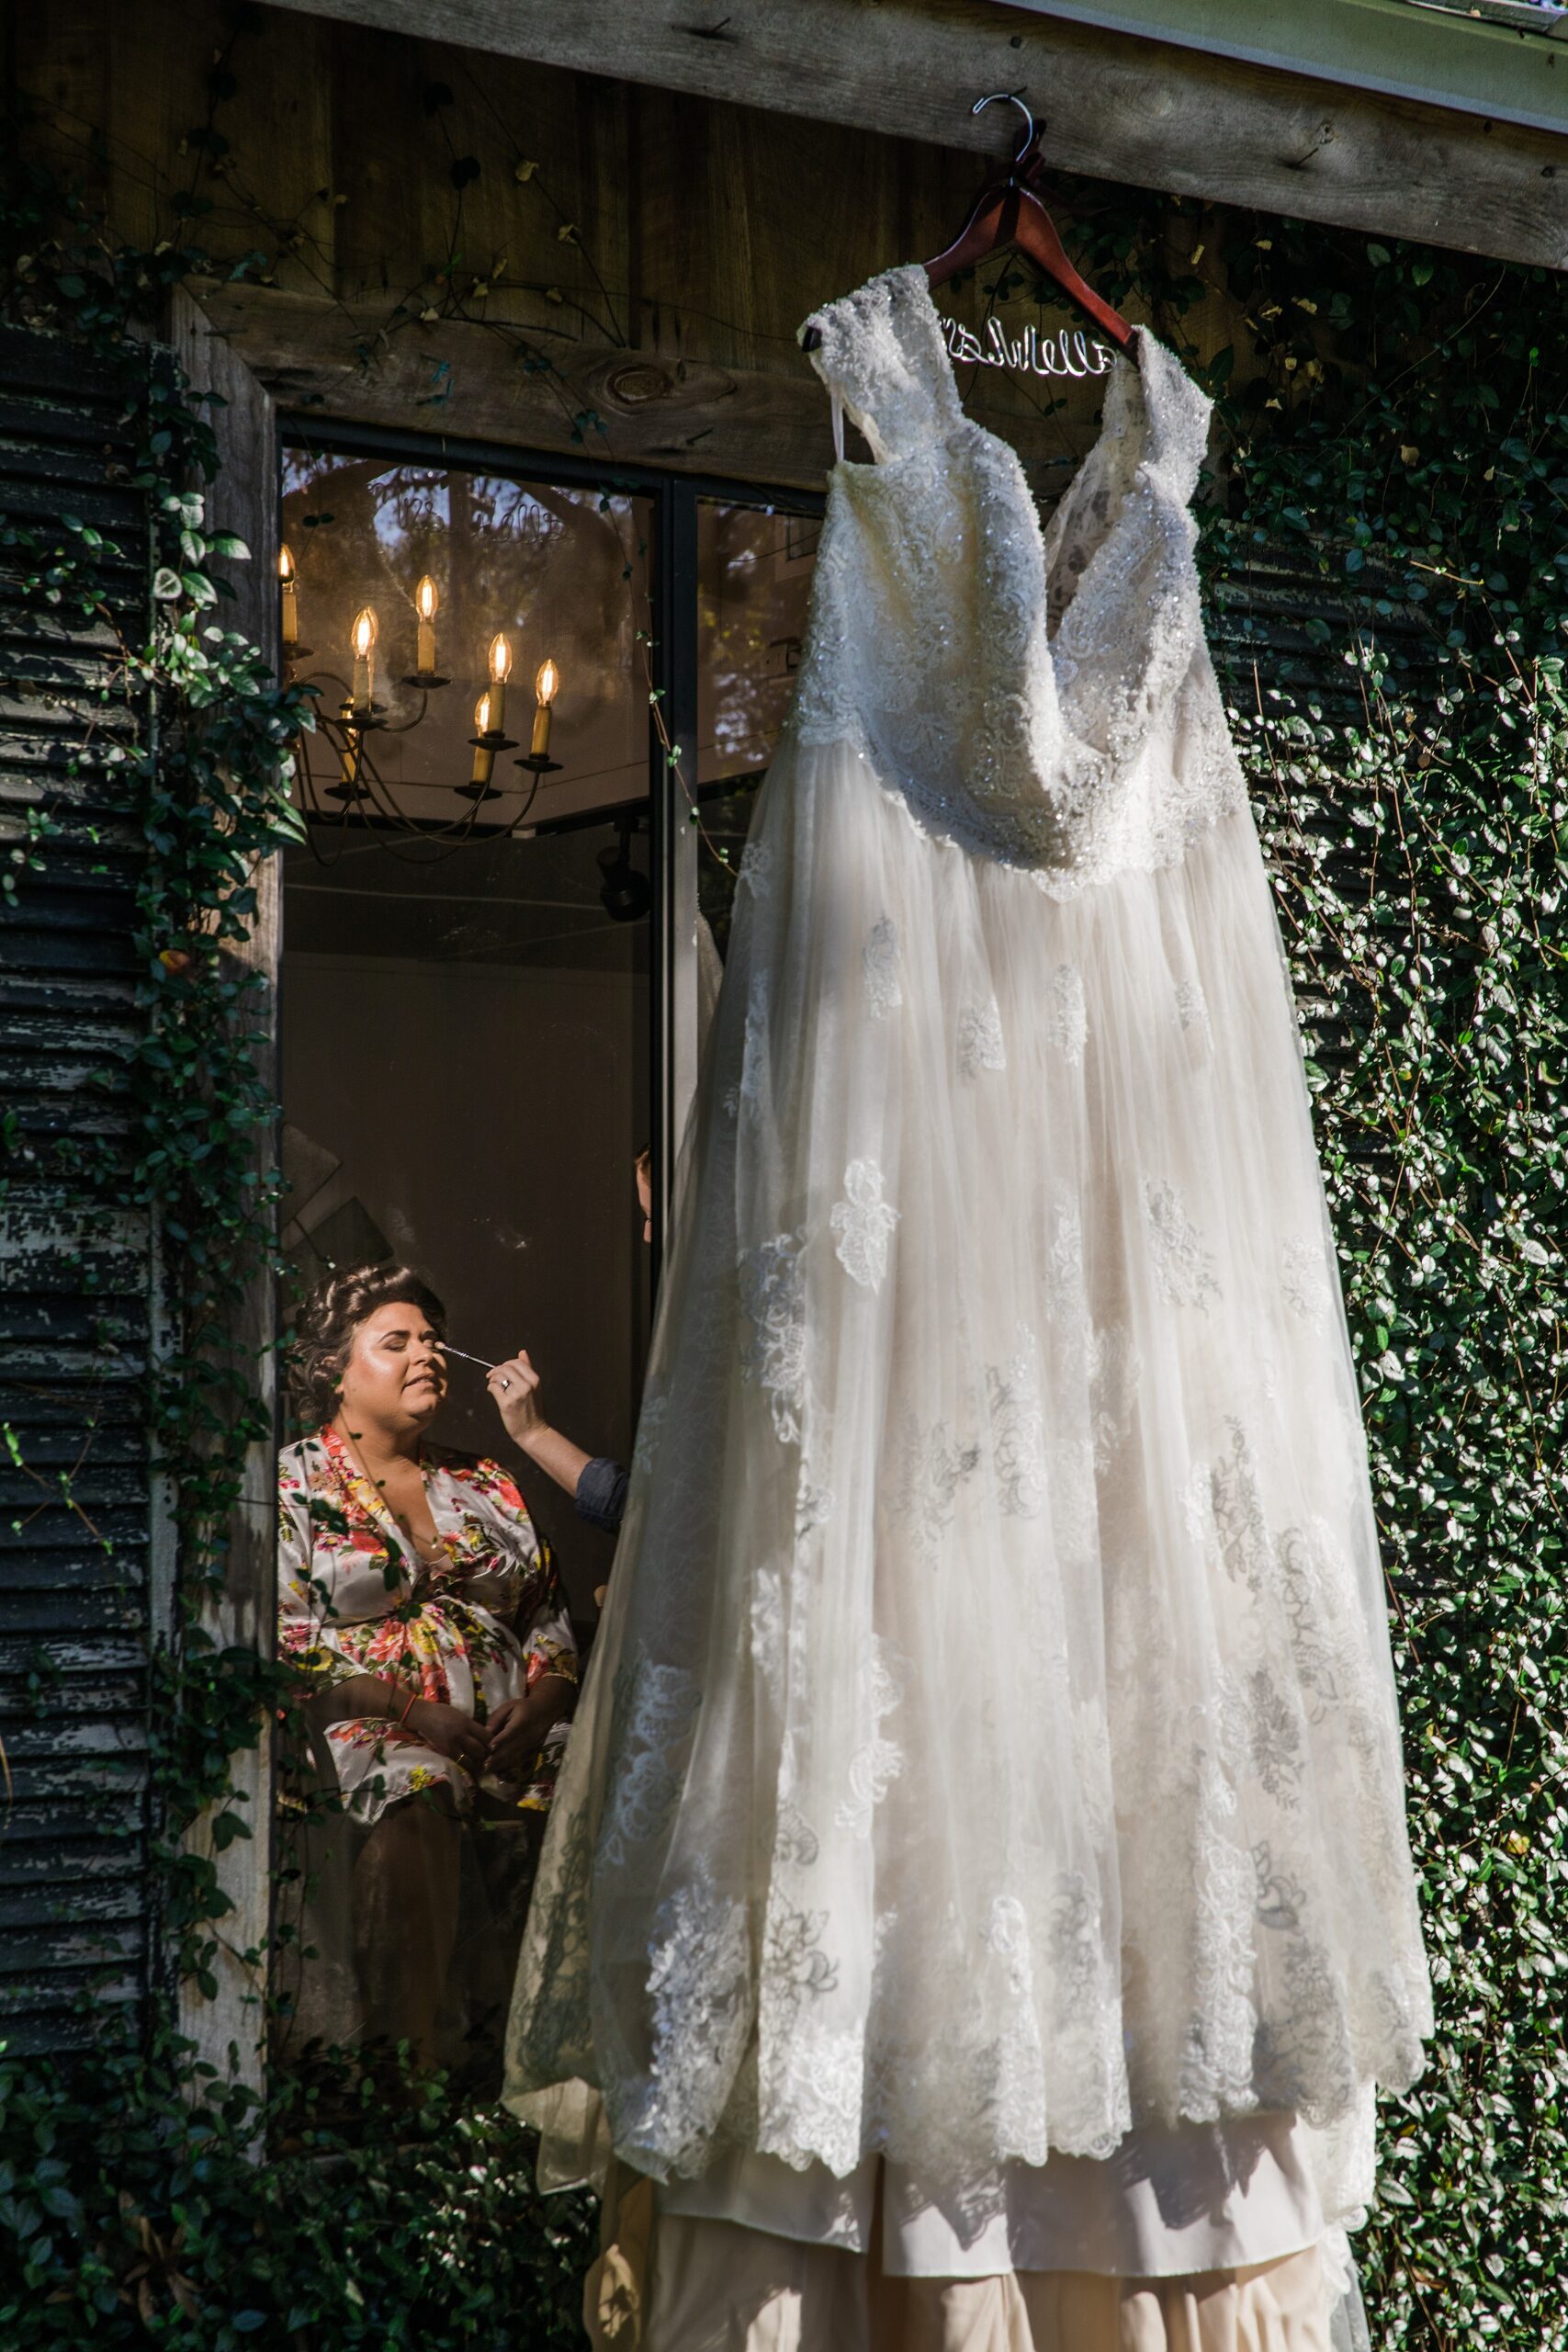 A dress hangs on a vine covered building while the bride gets makeup done inside